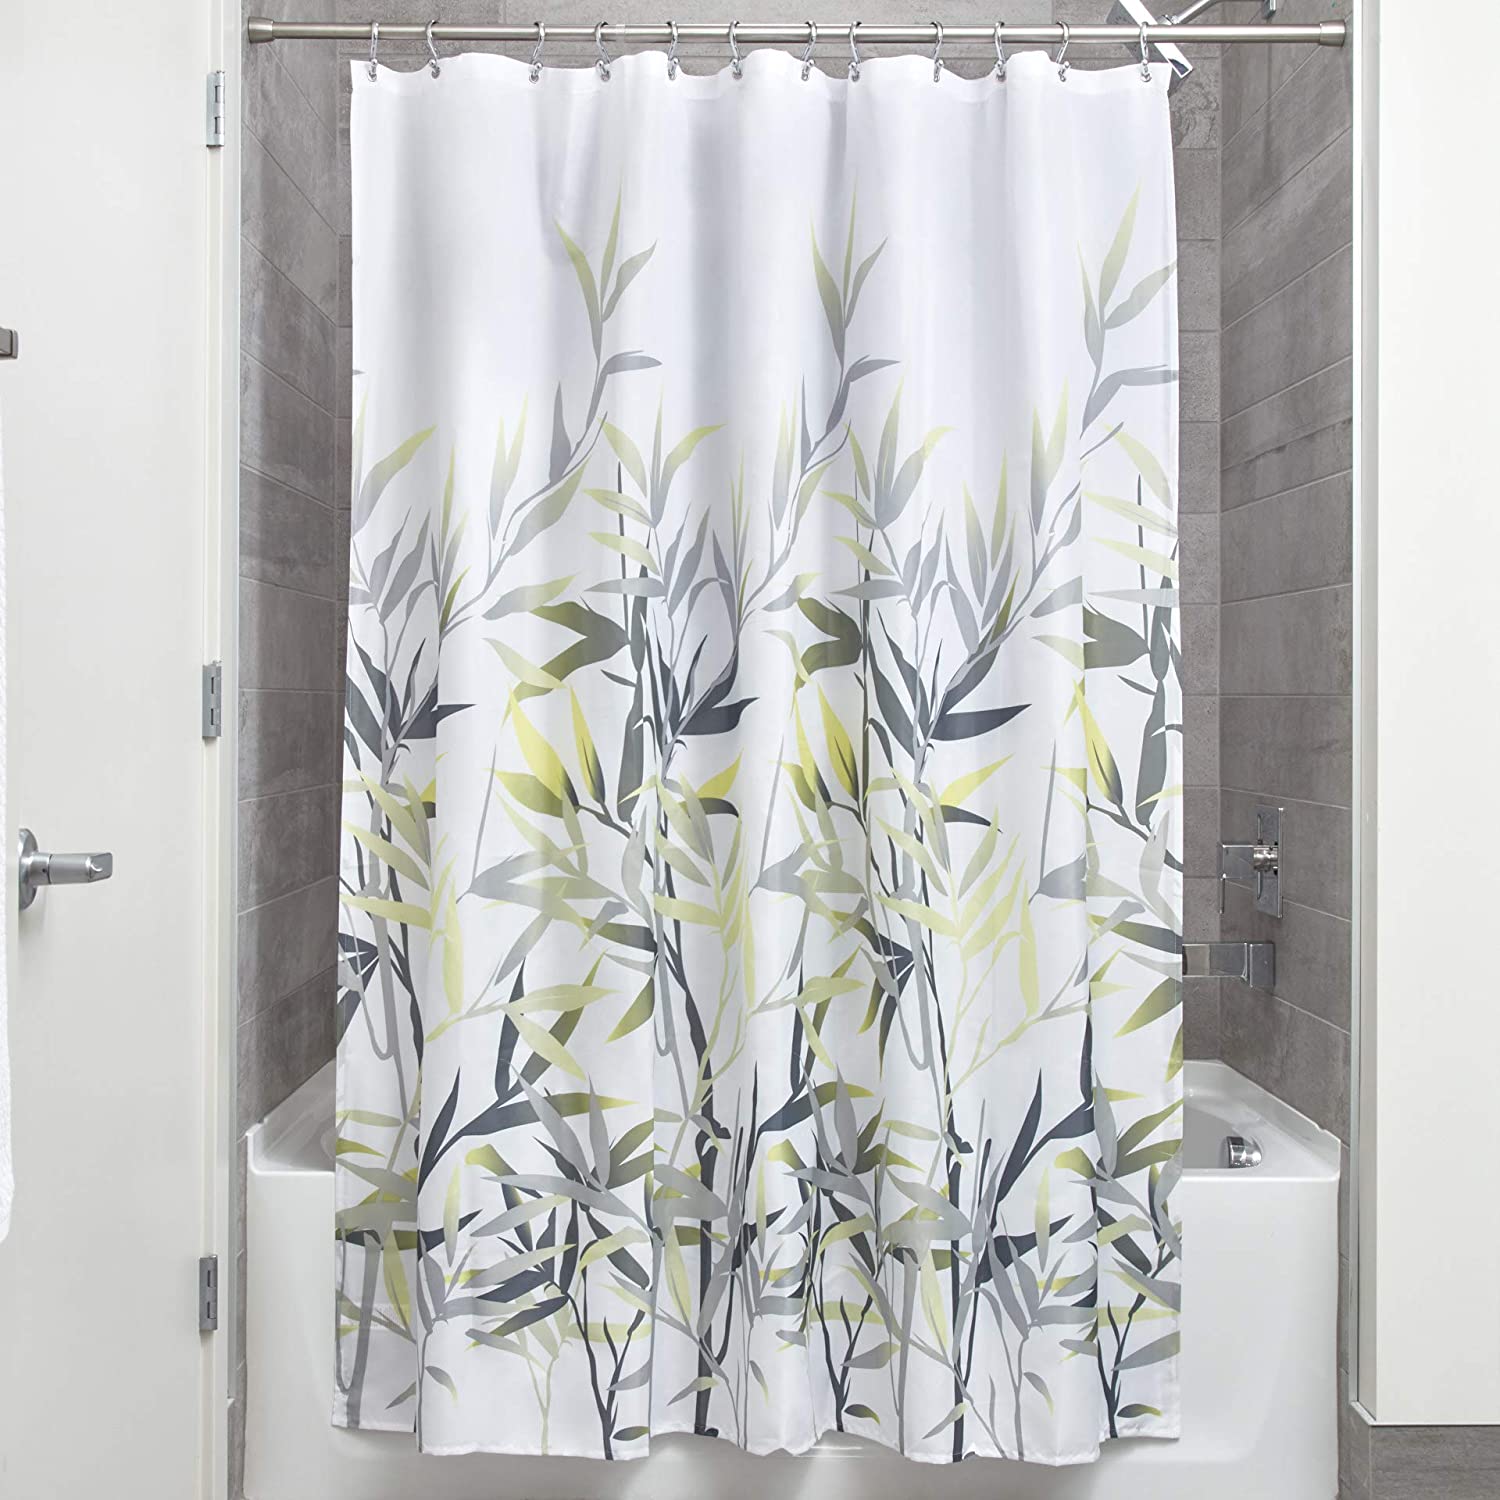 Details about   iDesign Anzu Fabric Shower Curtain Water-Repellent and Mold and Mildew-Resistan 